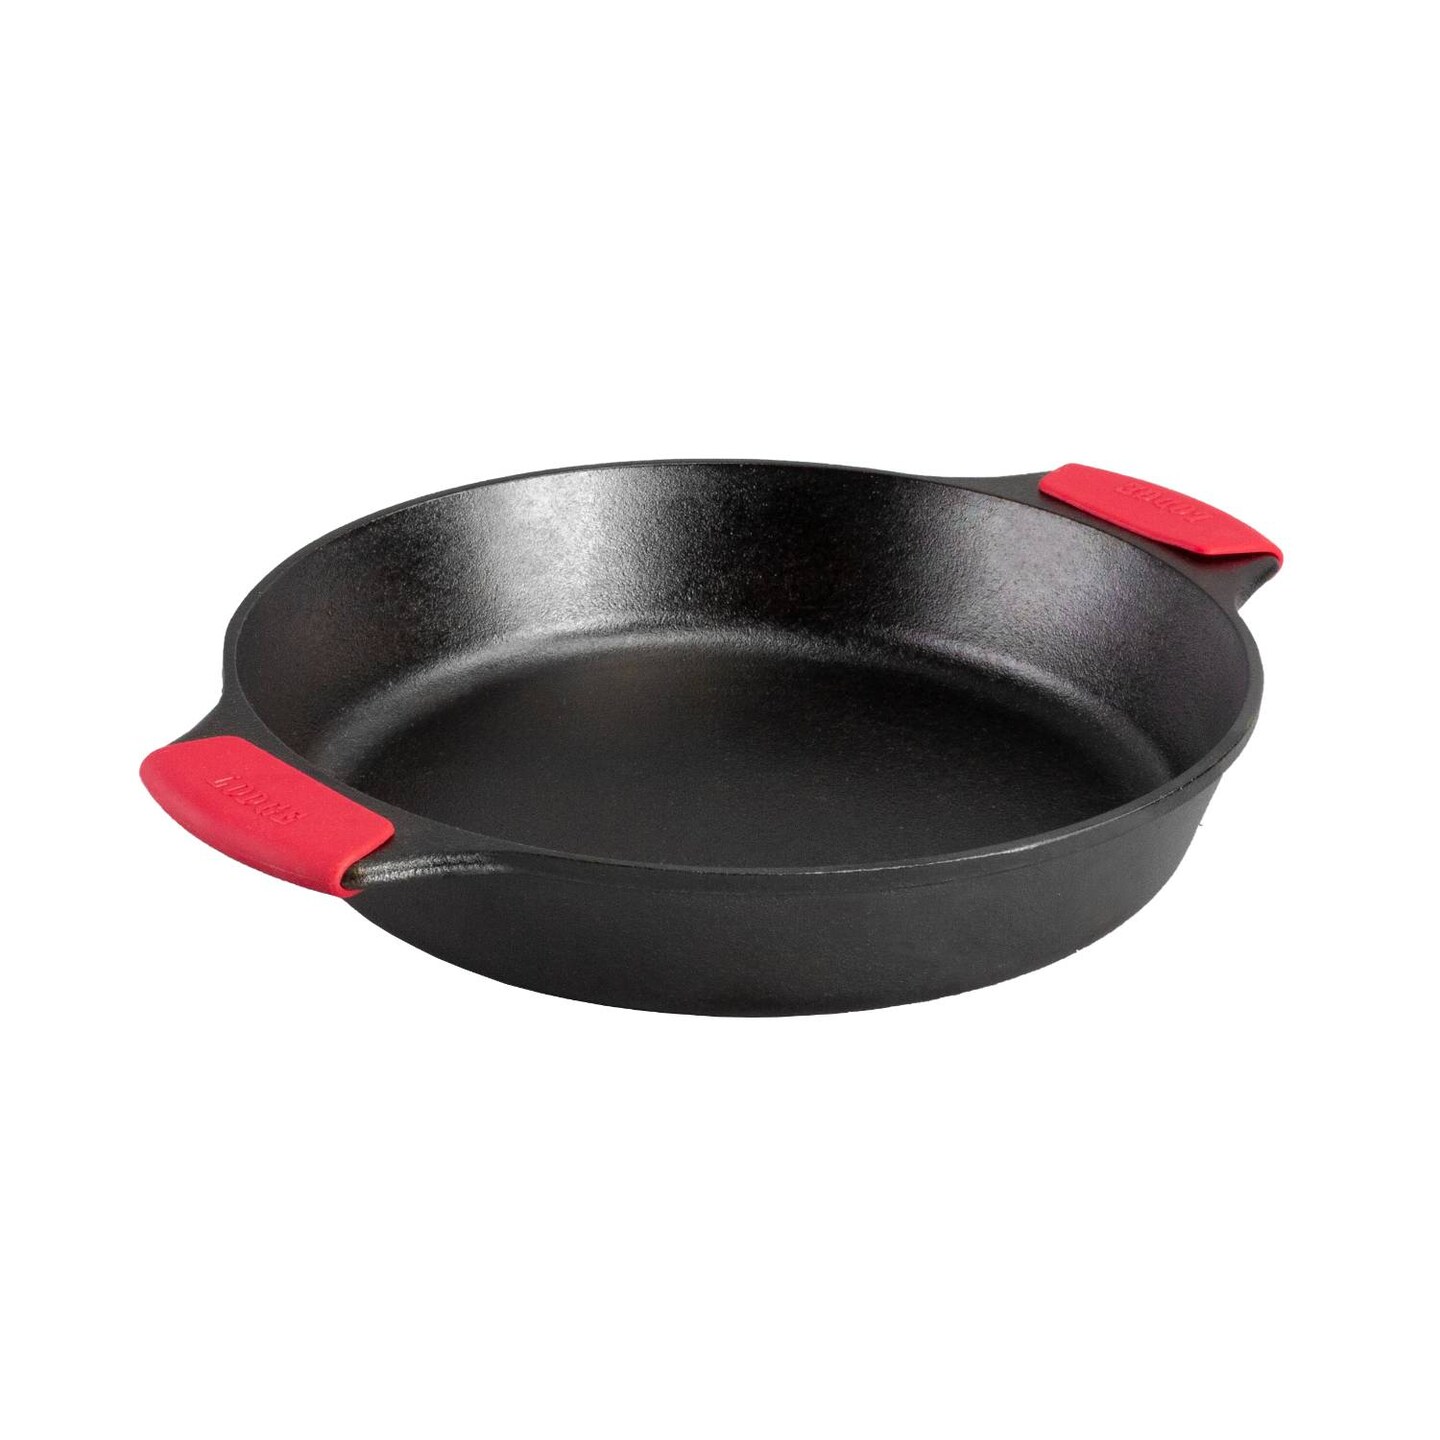 Lodge Cast Iron Skillet with Red Silicone Hot Handle Holder, 10.25-inch